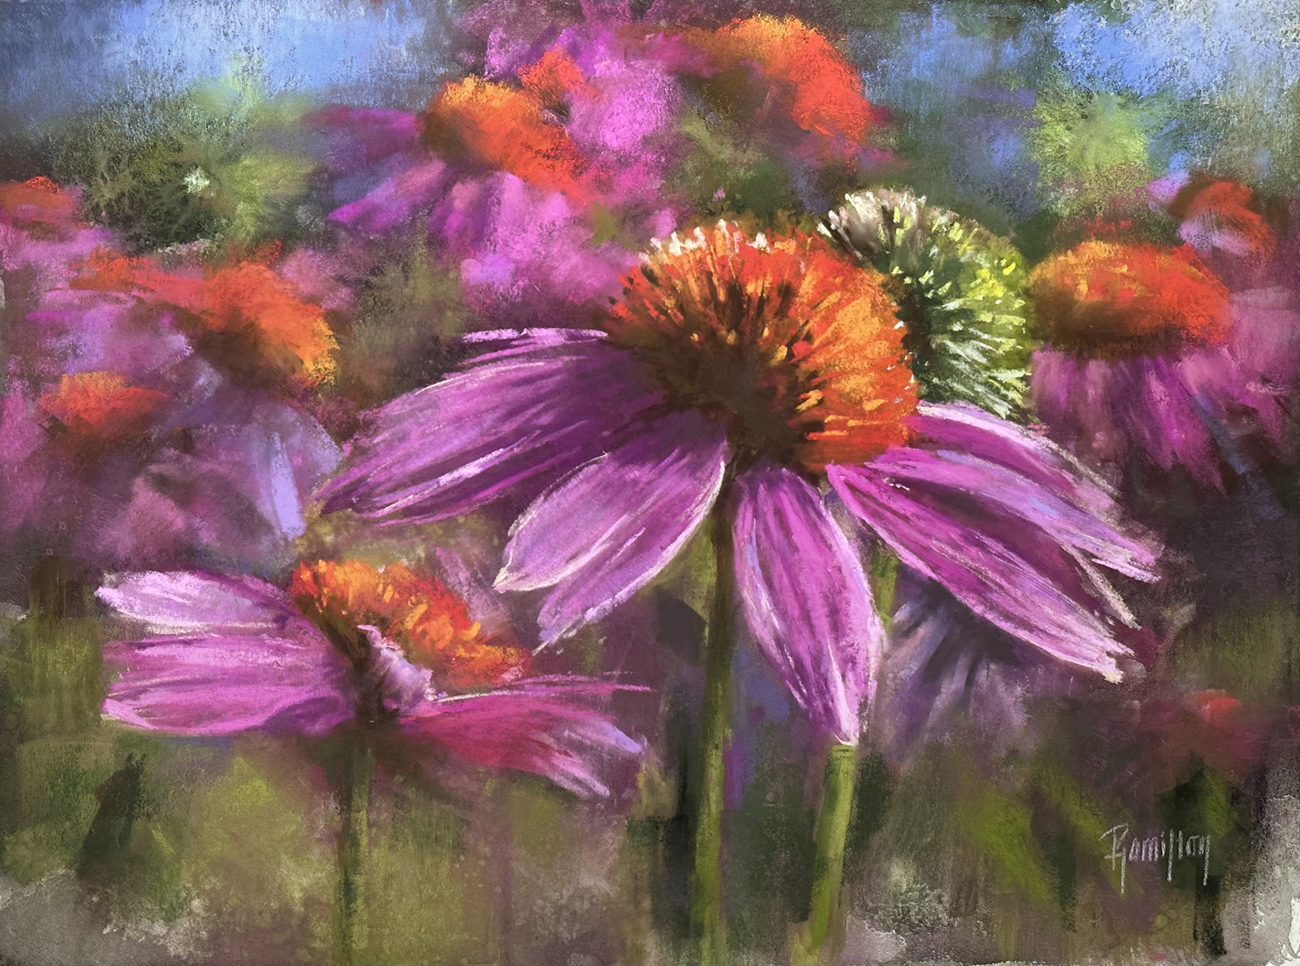 Pastel paintings - Pamela Hamilton, "Beauty Becomes Me,” pastel on paper, 12 x 16 in.